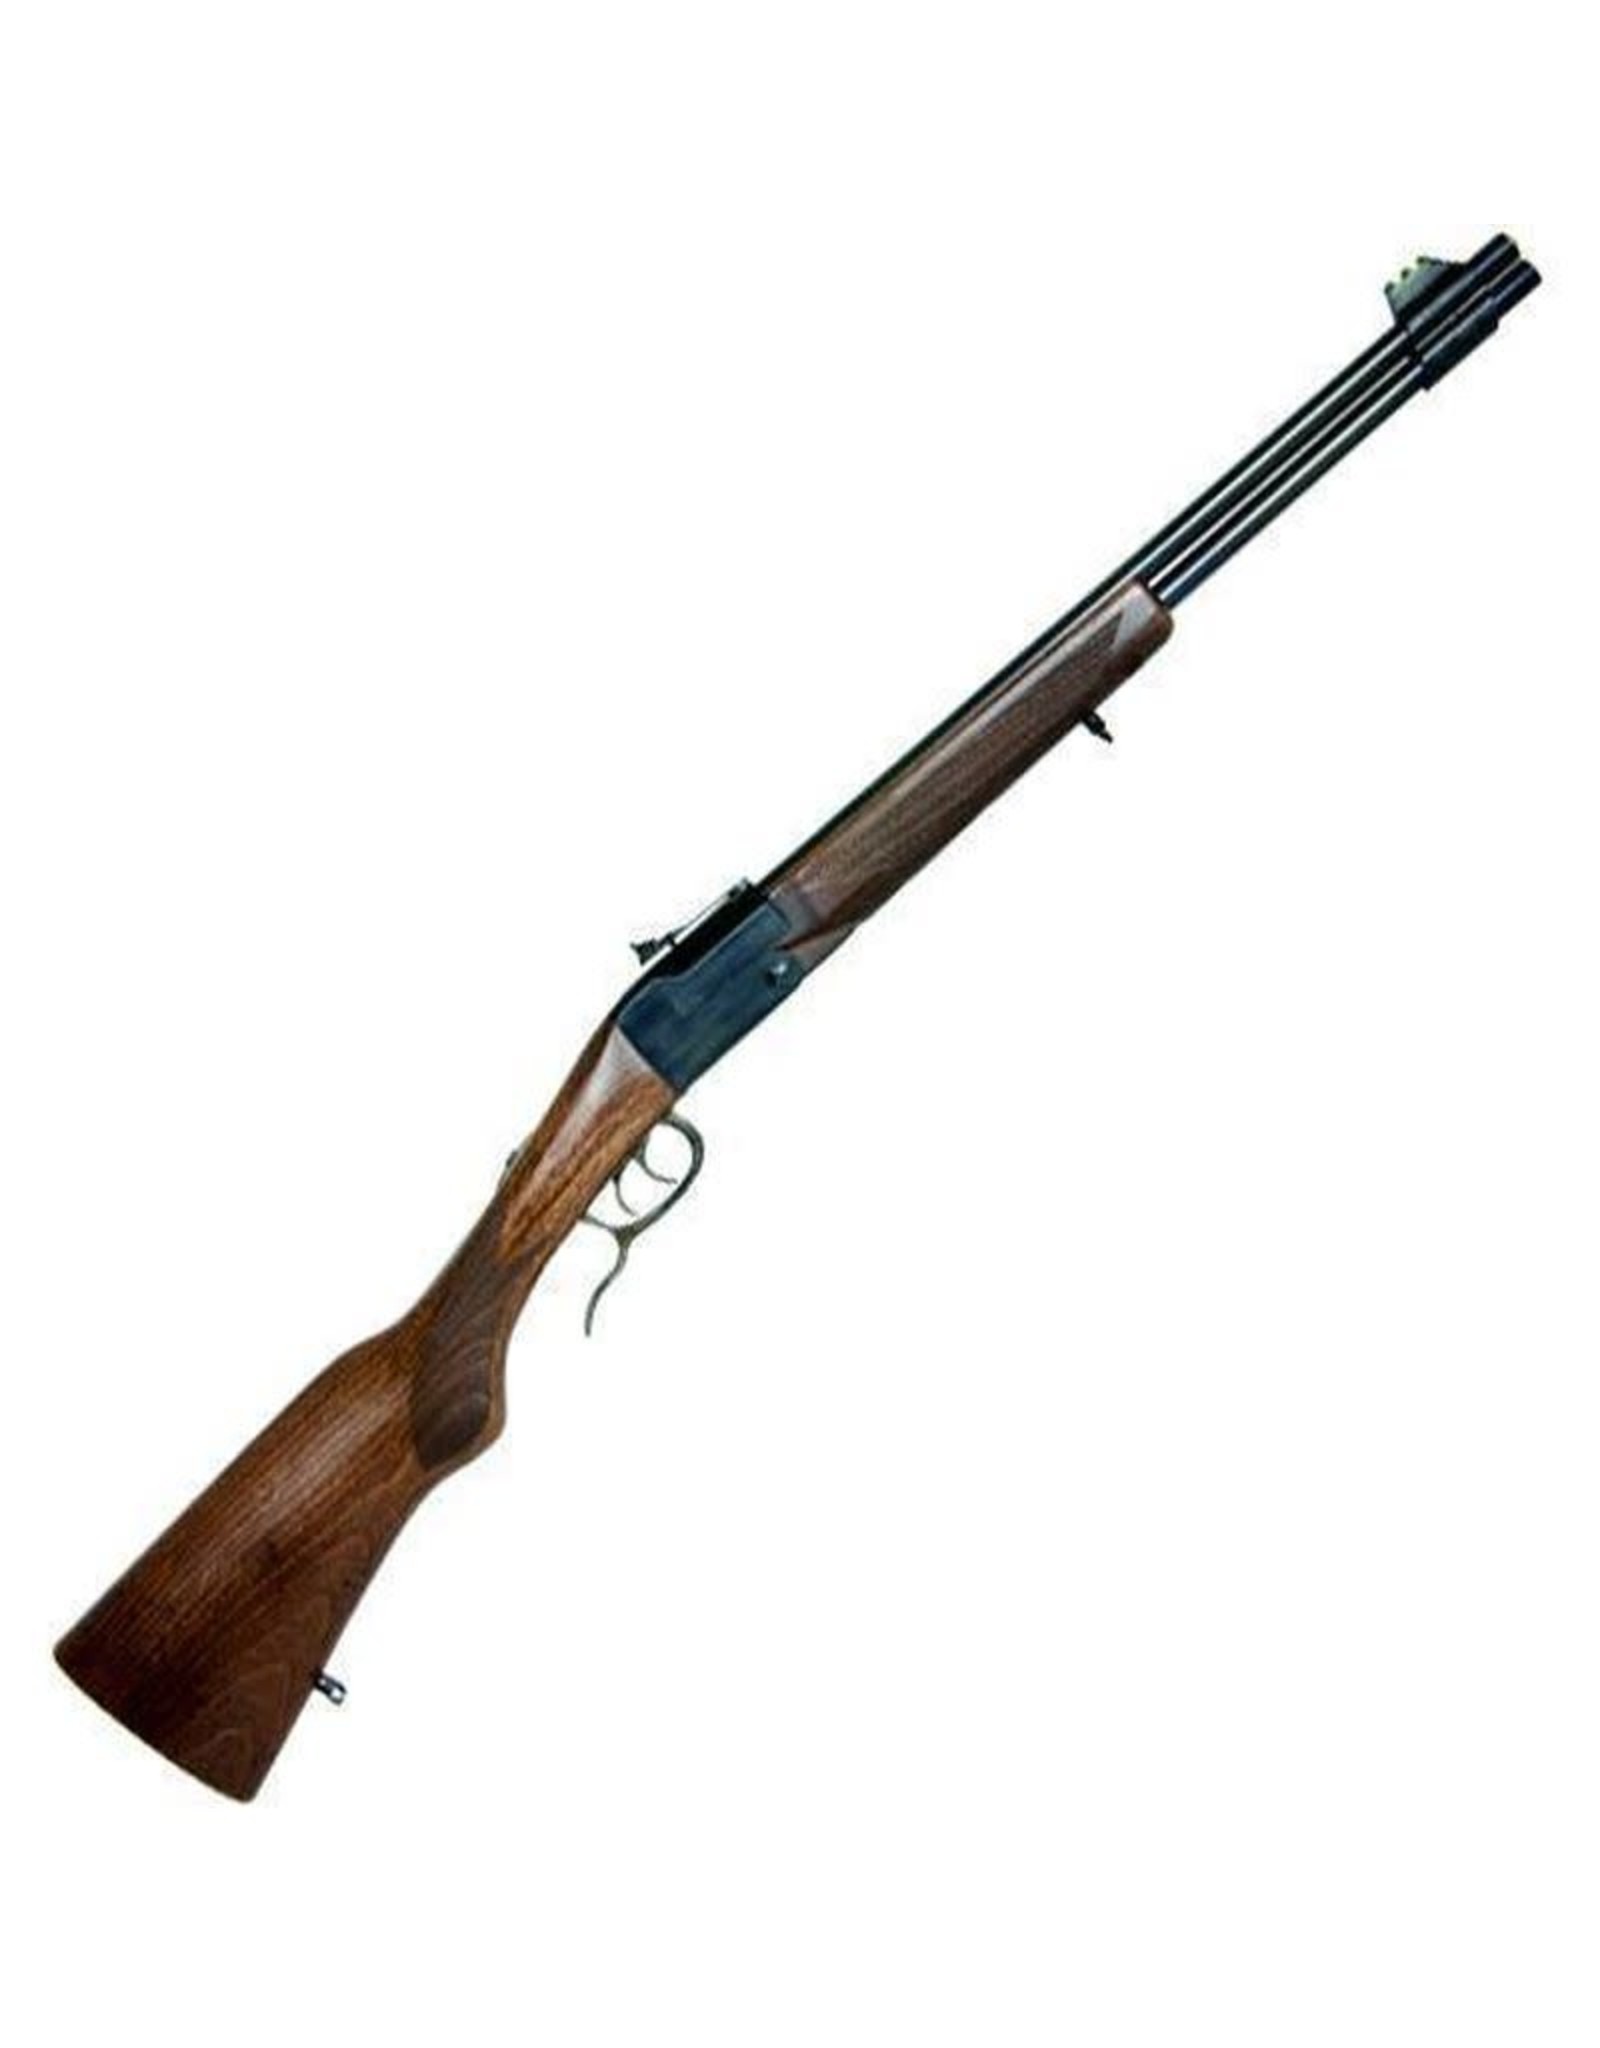 Chiappa Chiappa Firearms Double Badger Combined Over/Under Rifle .22LR/.410 Bore 19" Barrel 2 Rounds Wood Stock